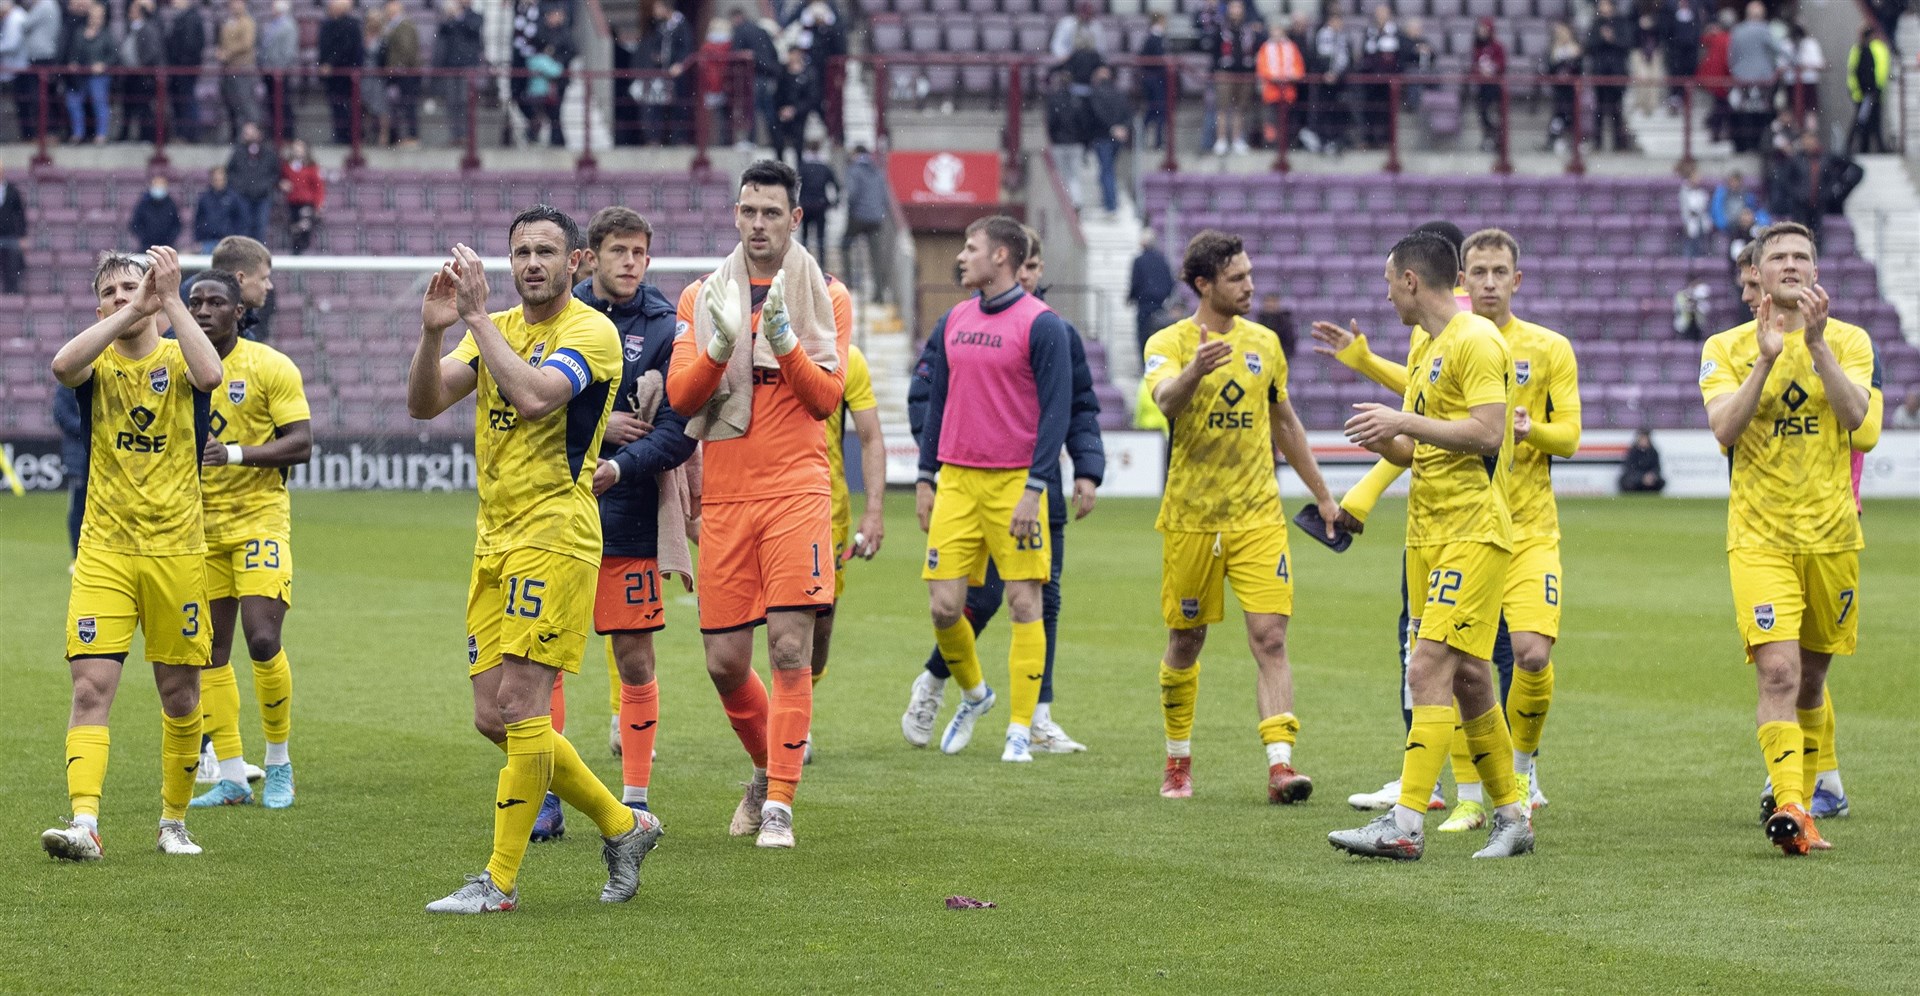 Ross County captain Keith Watson leads his team’s support for their large travelling support at the end.